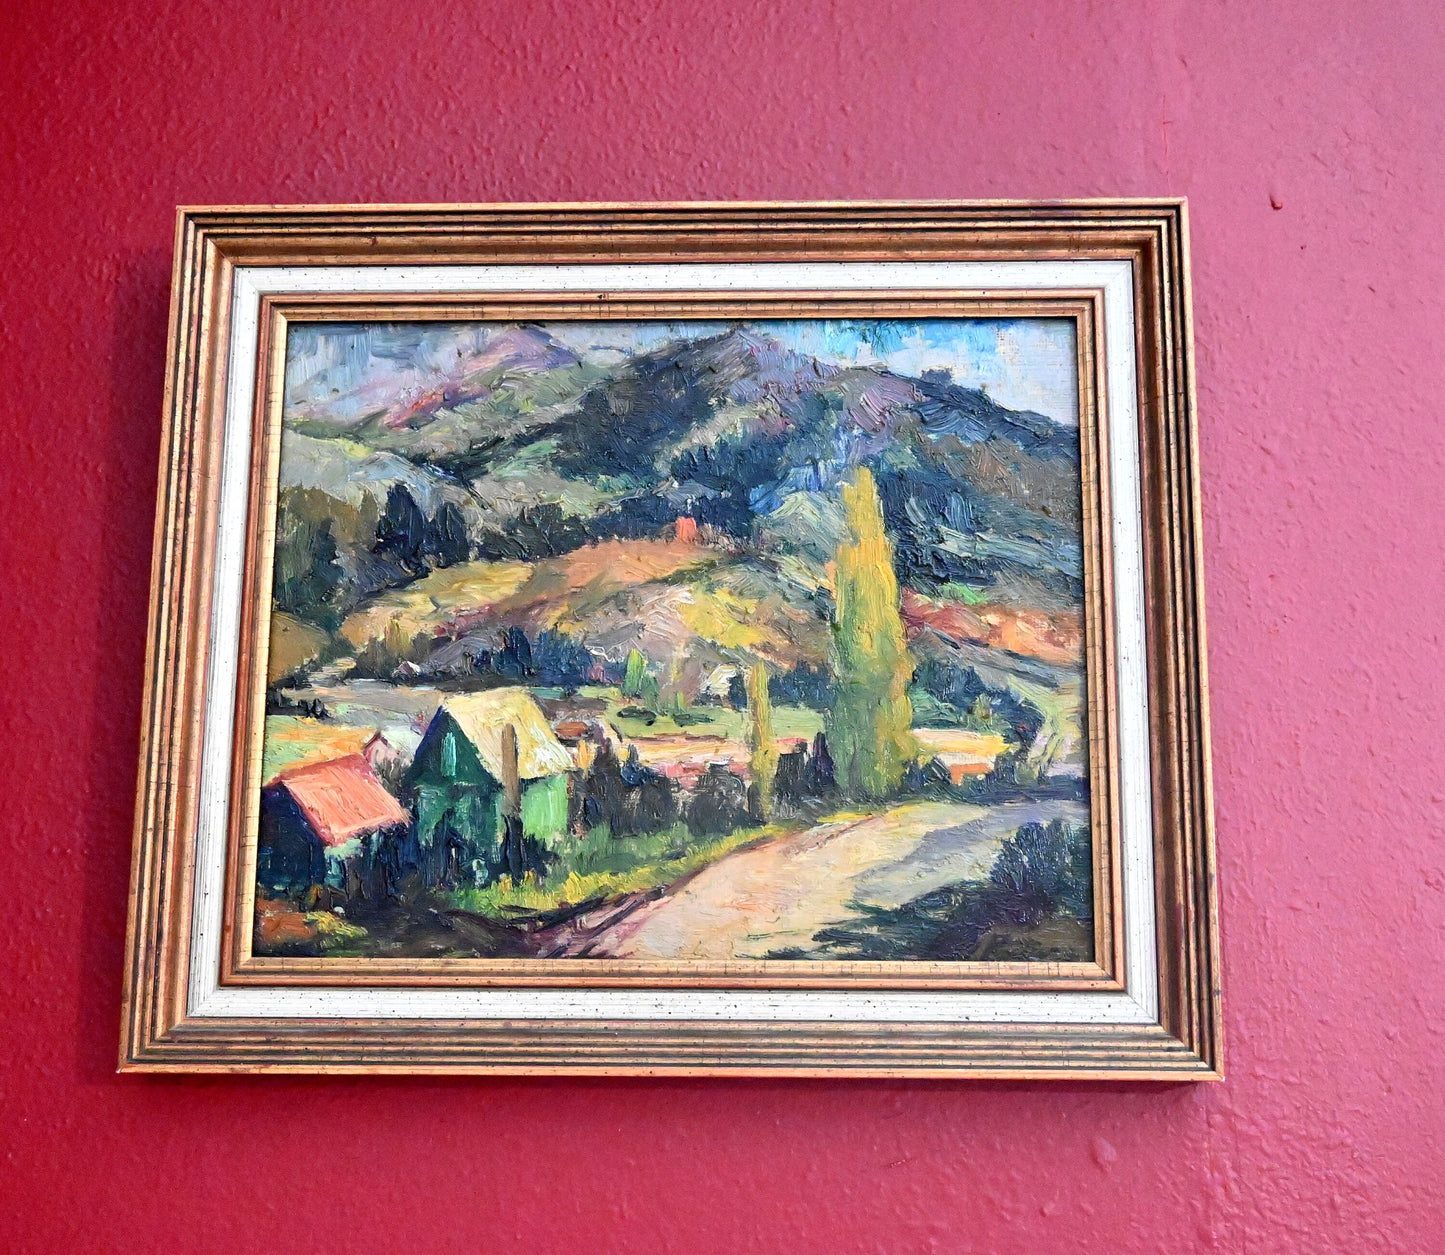 Gorgeous Tuscan Village Oil Painting -signature illegible needs research -14 X 12 1/4 inches- Masterfully executed